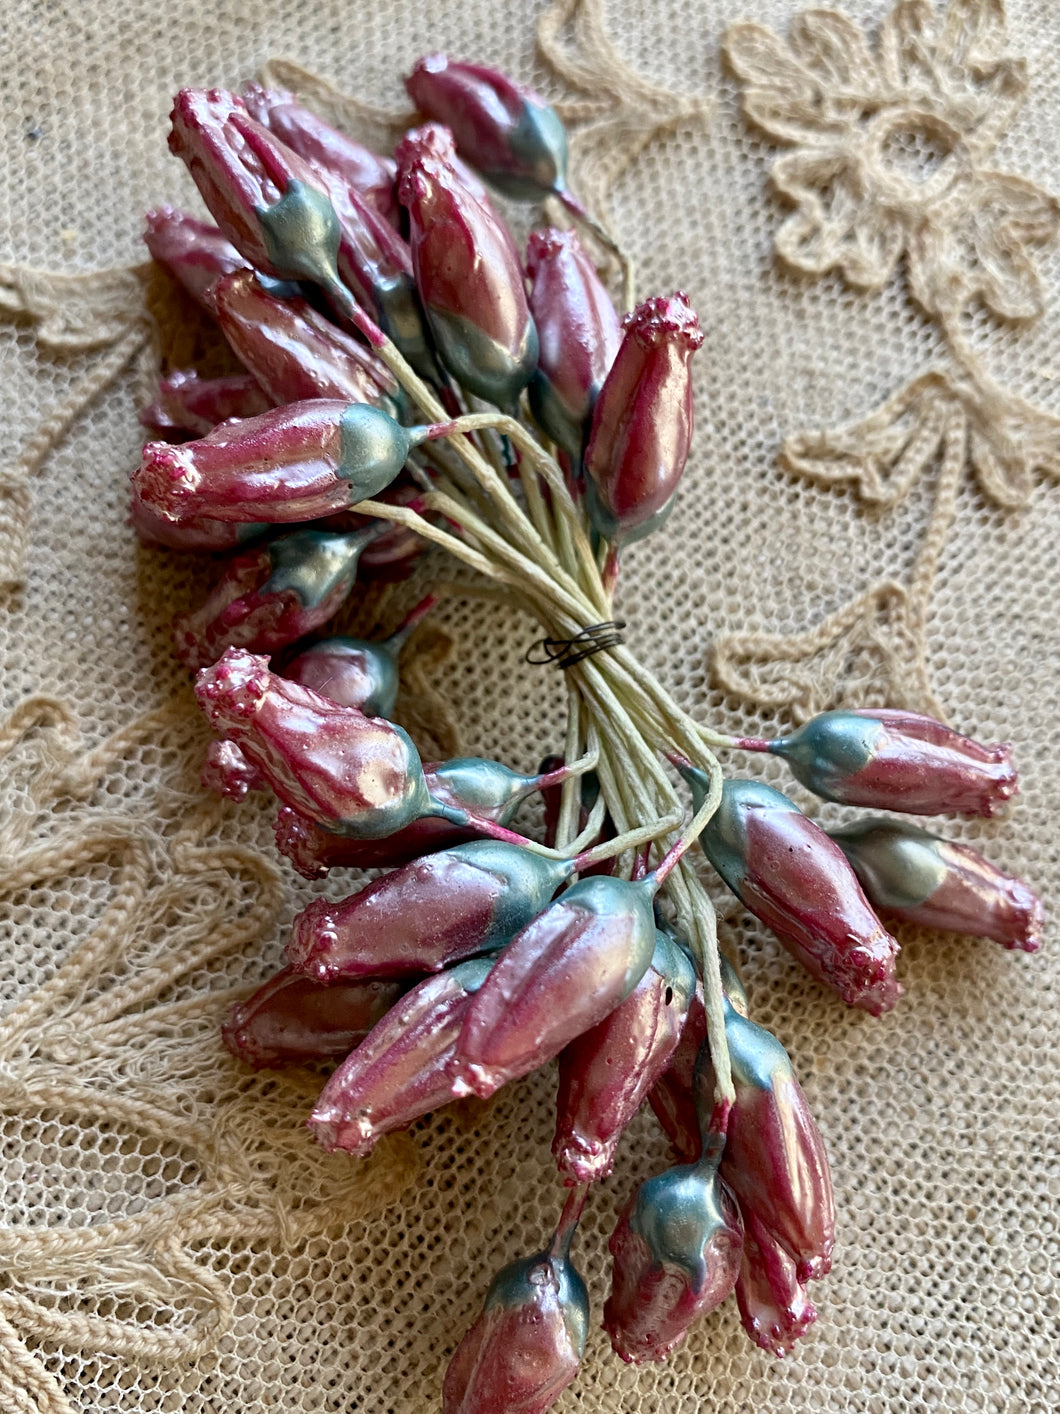 Original Large Bunches of French Rose Buds